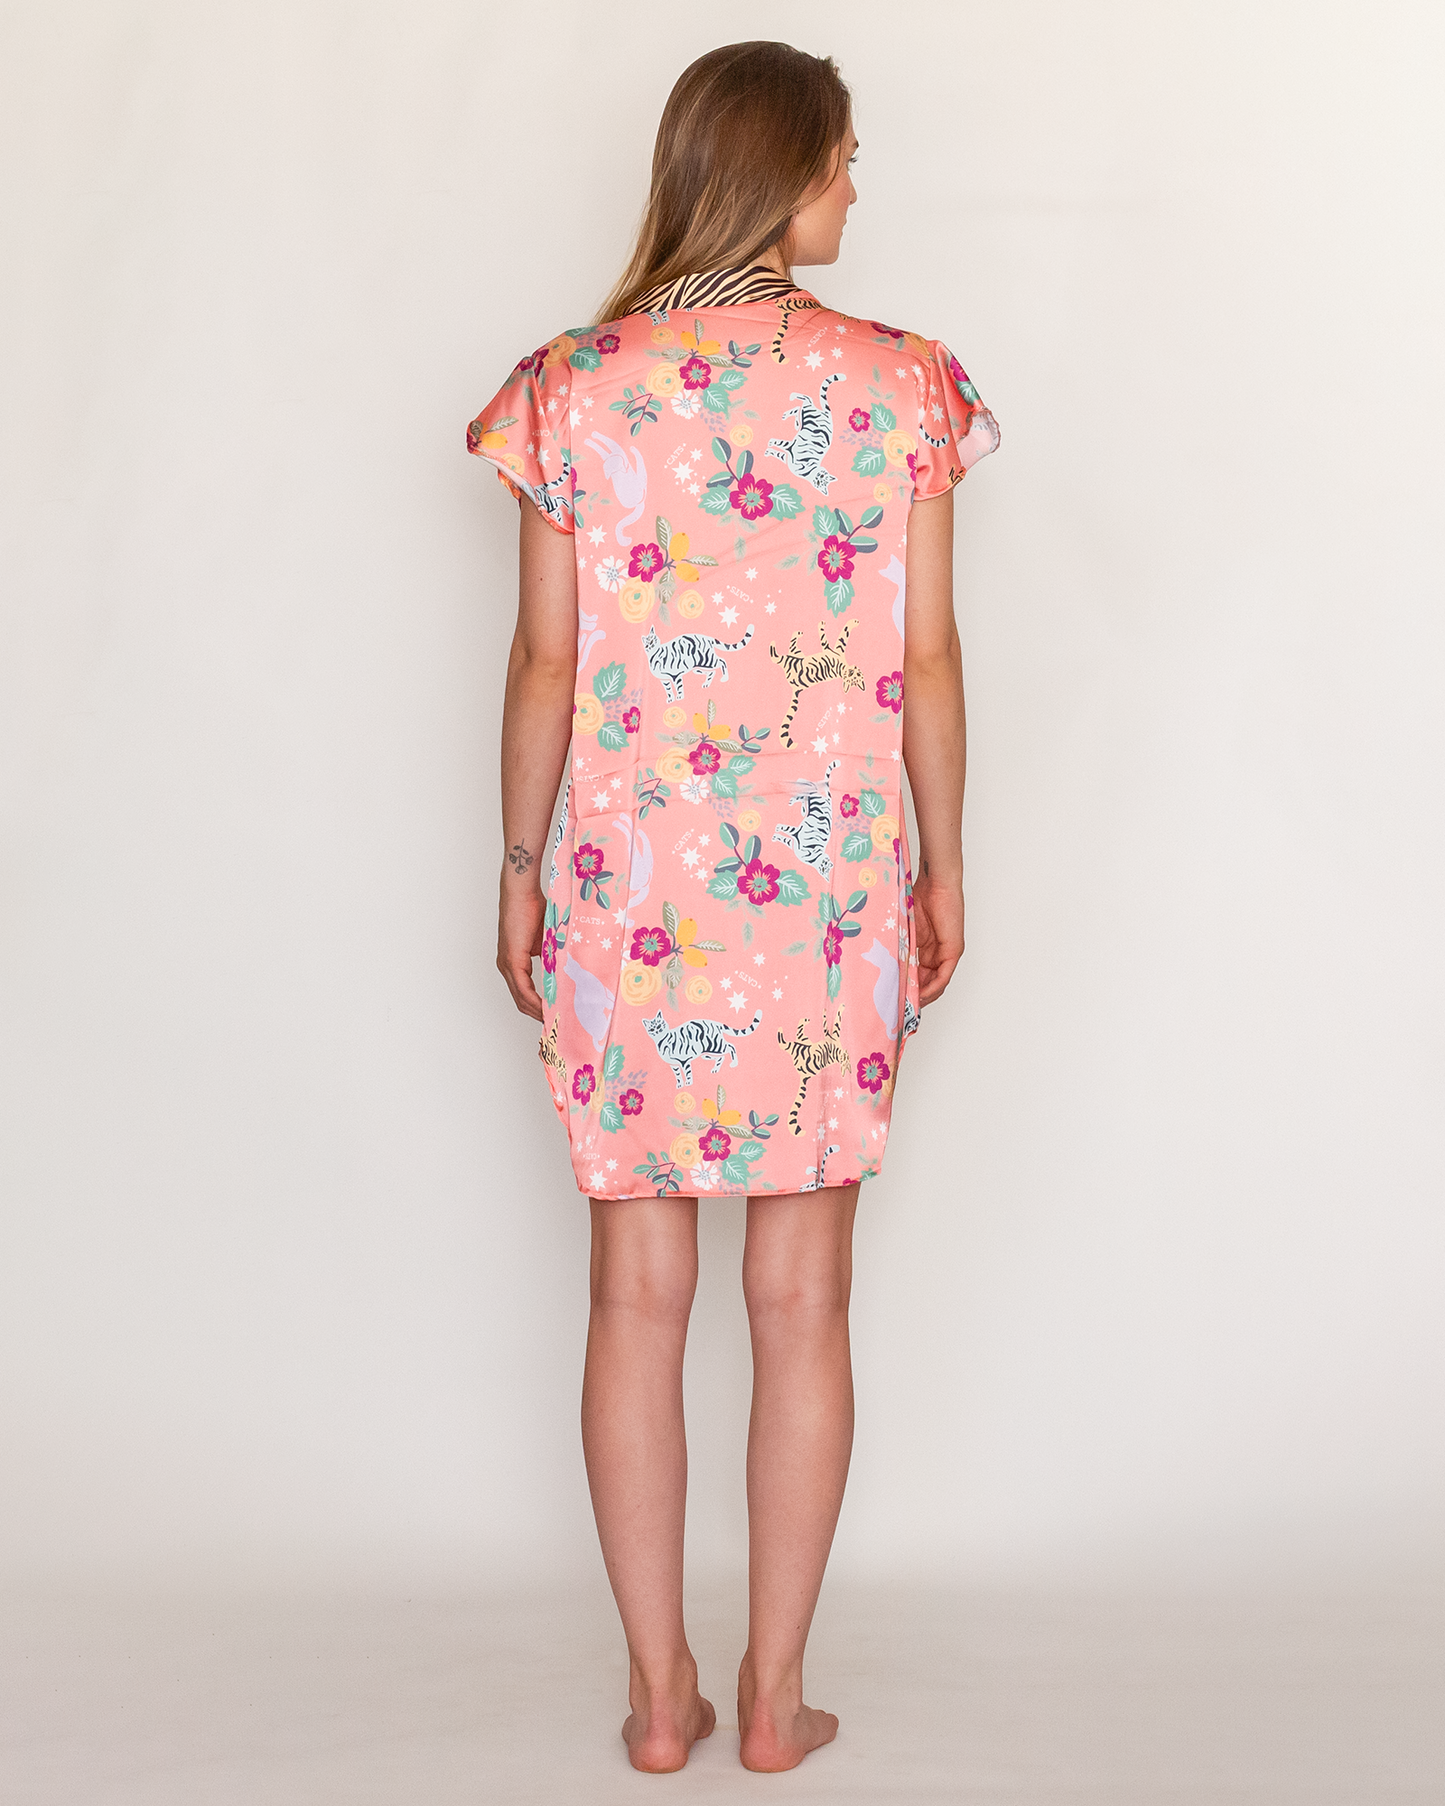 CAMISOLA SIAMES FLOWER POWER CORAL